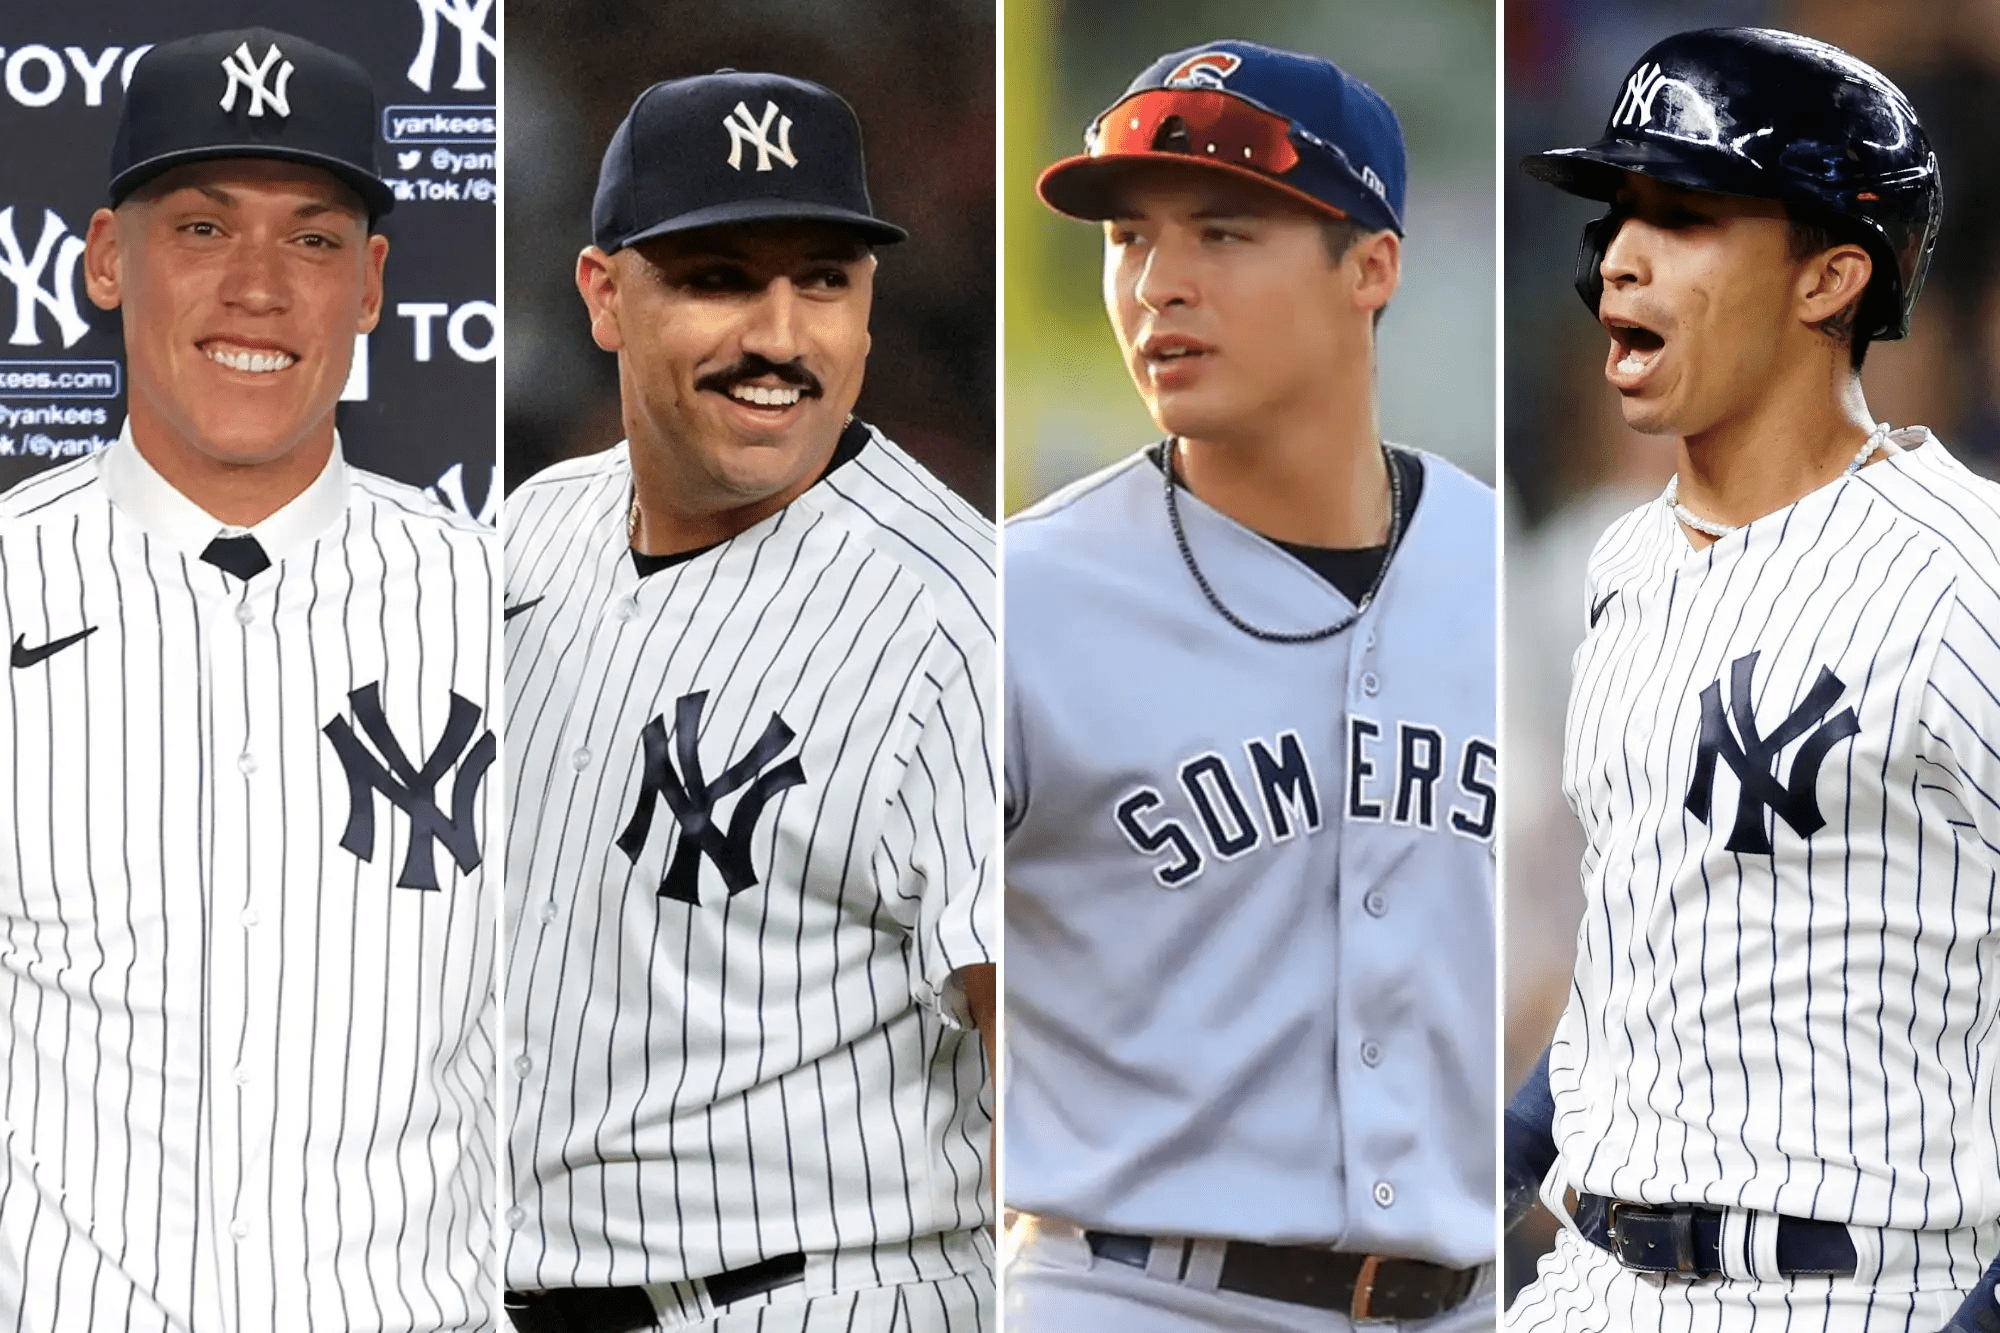 ZiPS Projections Foresee A Good 2023 Season For The Yankees